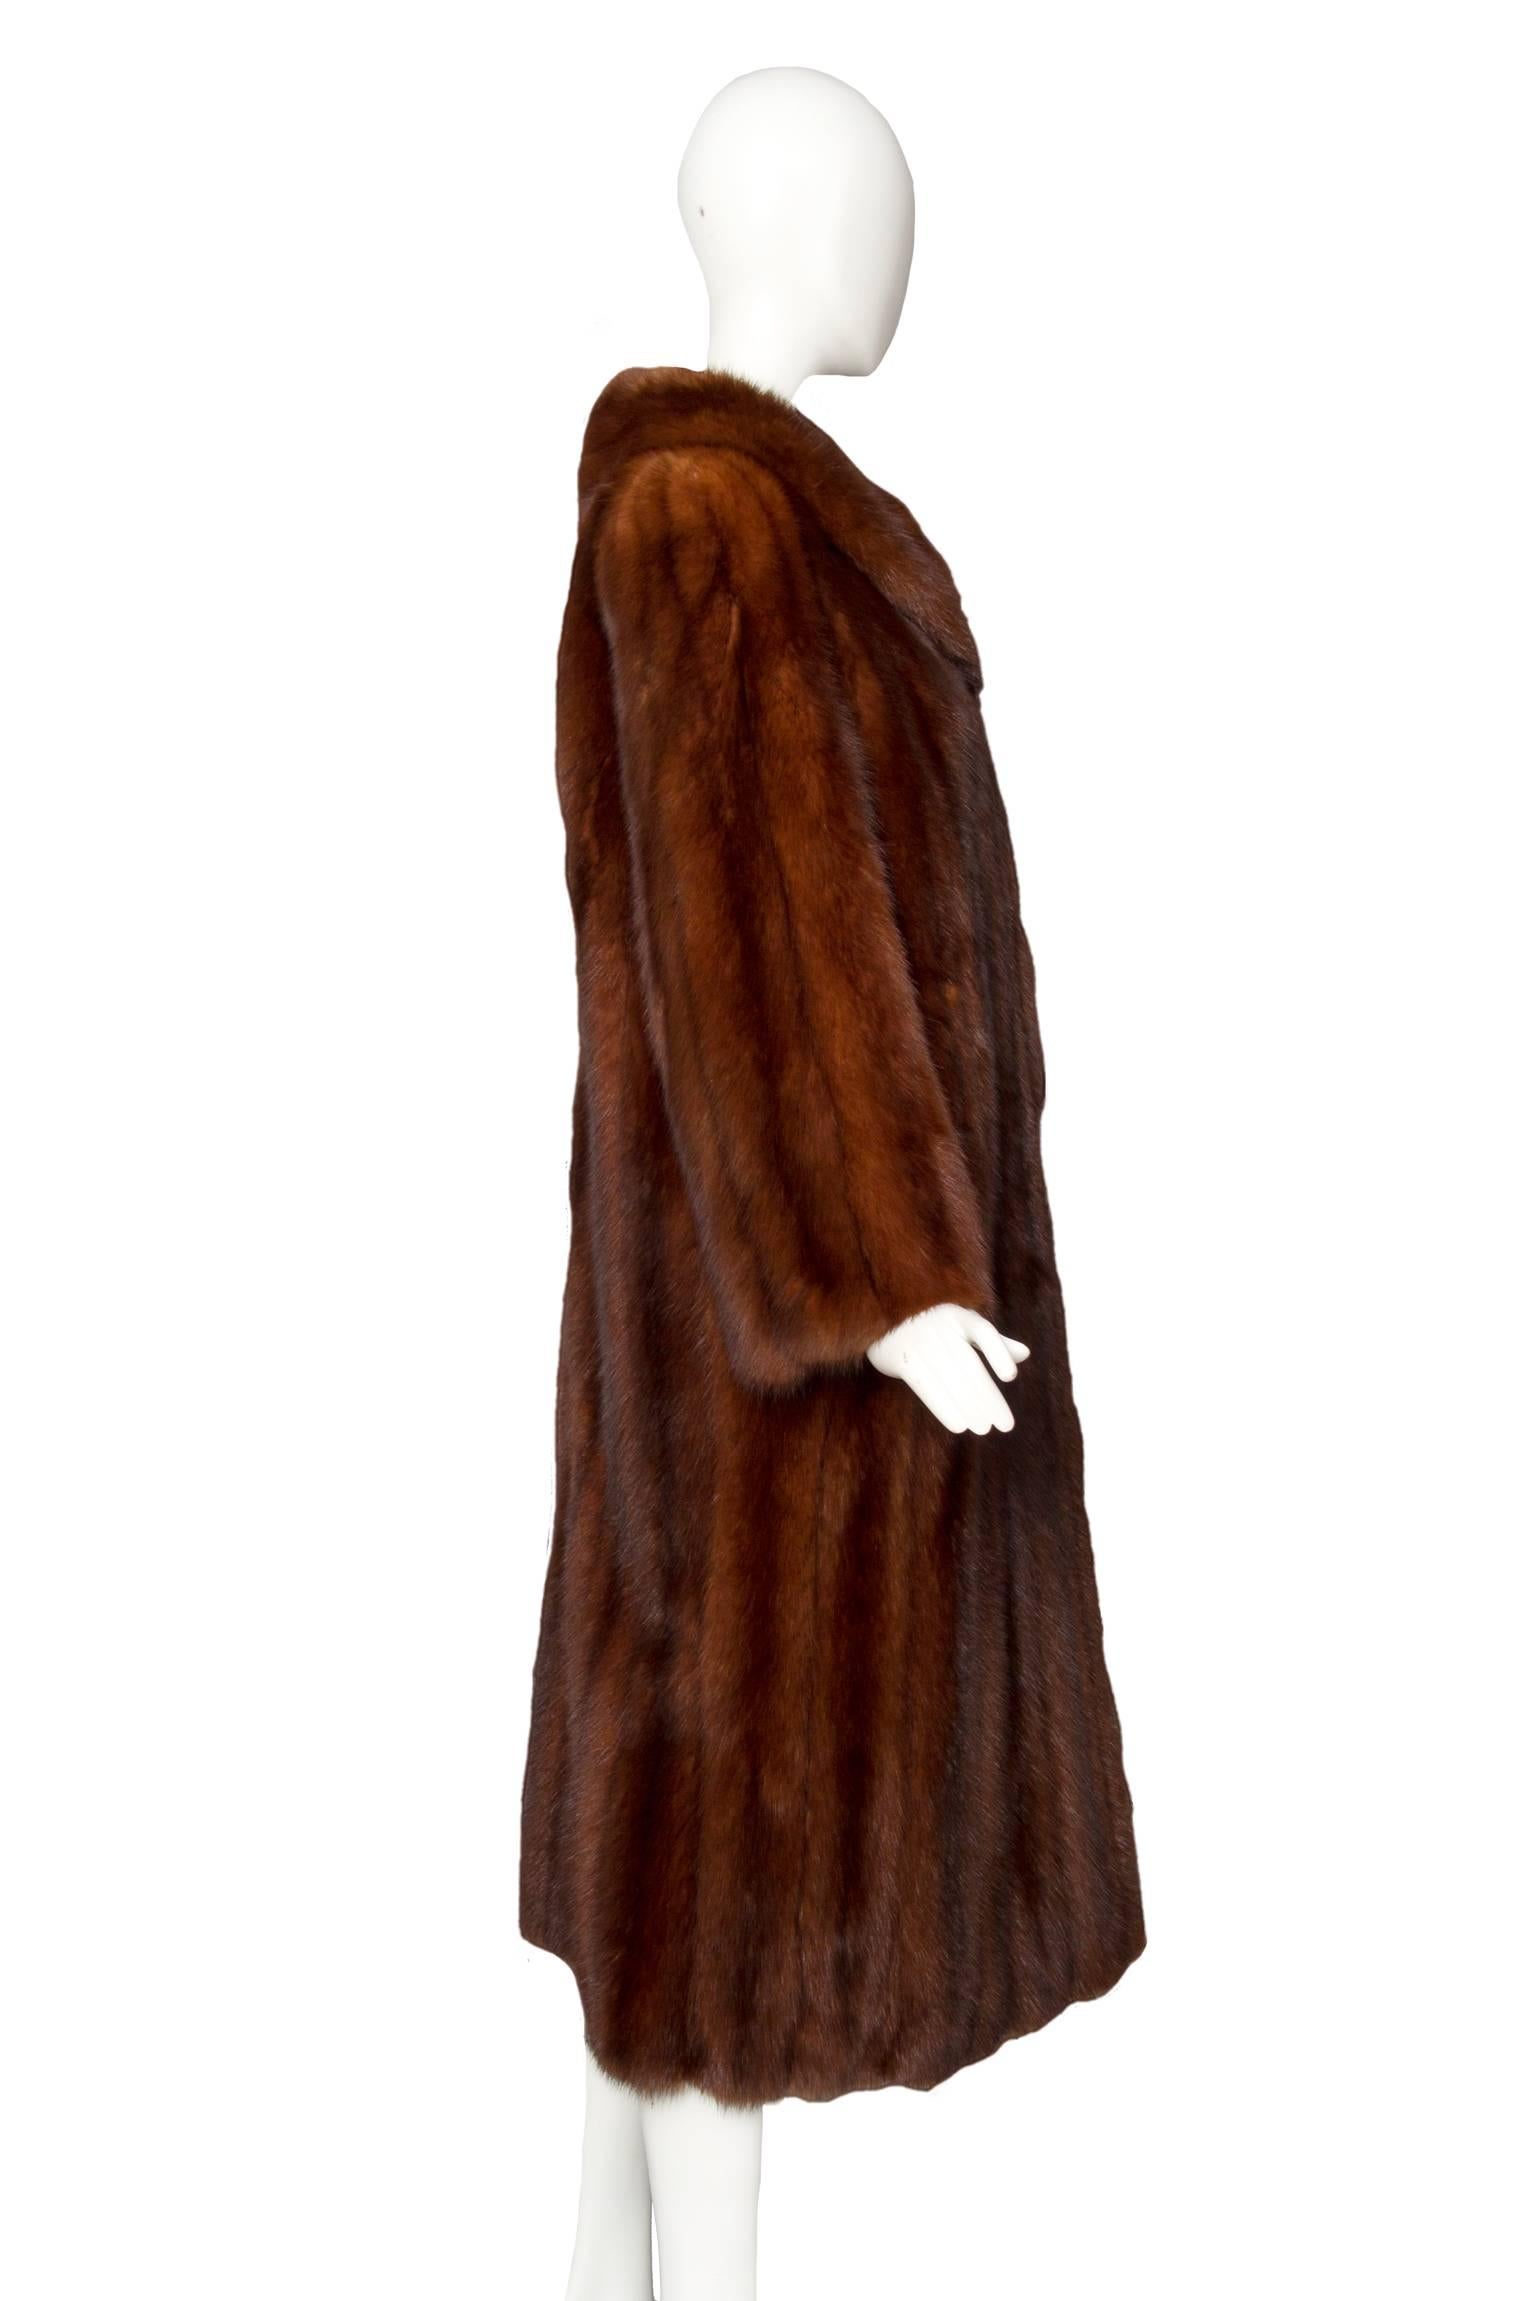 A stunning 1980s knee-length brown Russian sable fur coat with side pockets and dark leather paneling underneath each arm. The elegant coat is fully lined with a light brown jacquard woven silk and has a small leather trimmed slit is situated at the